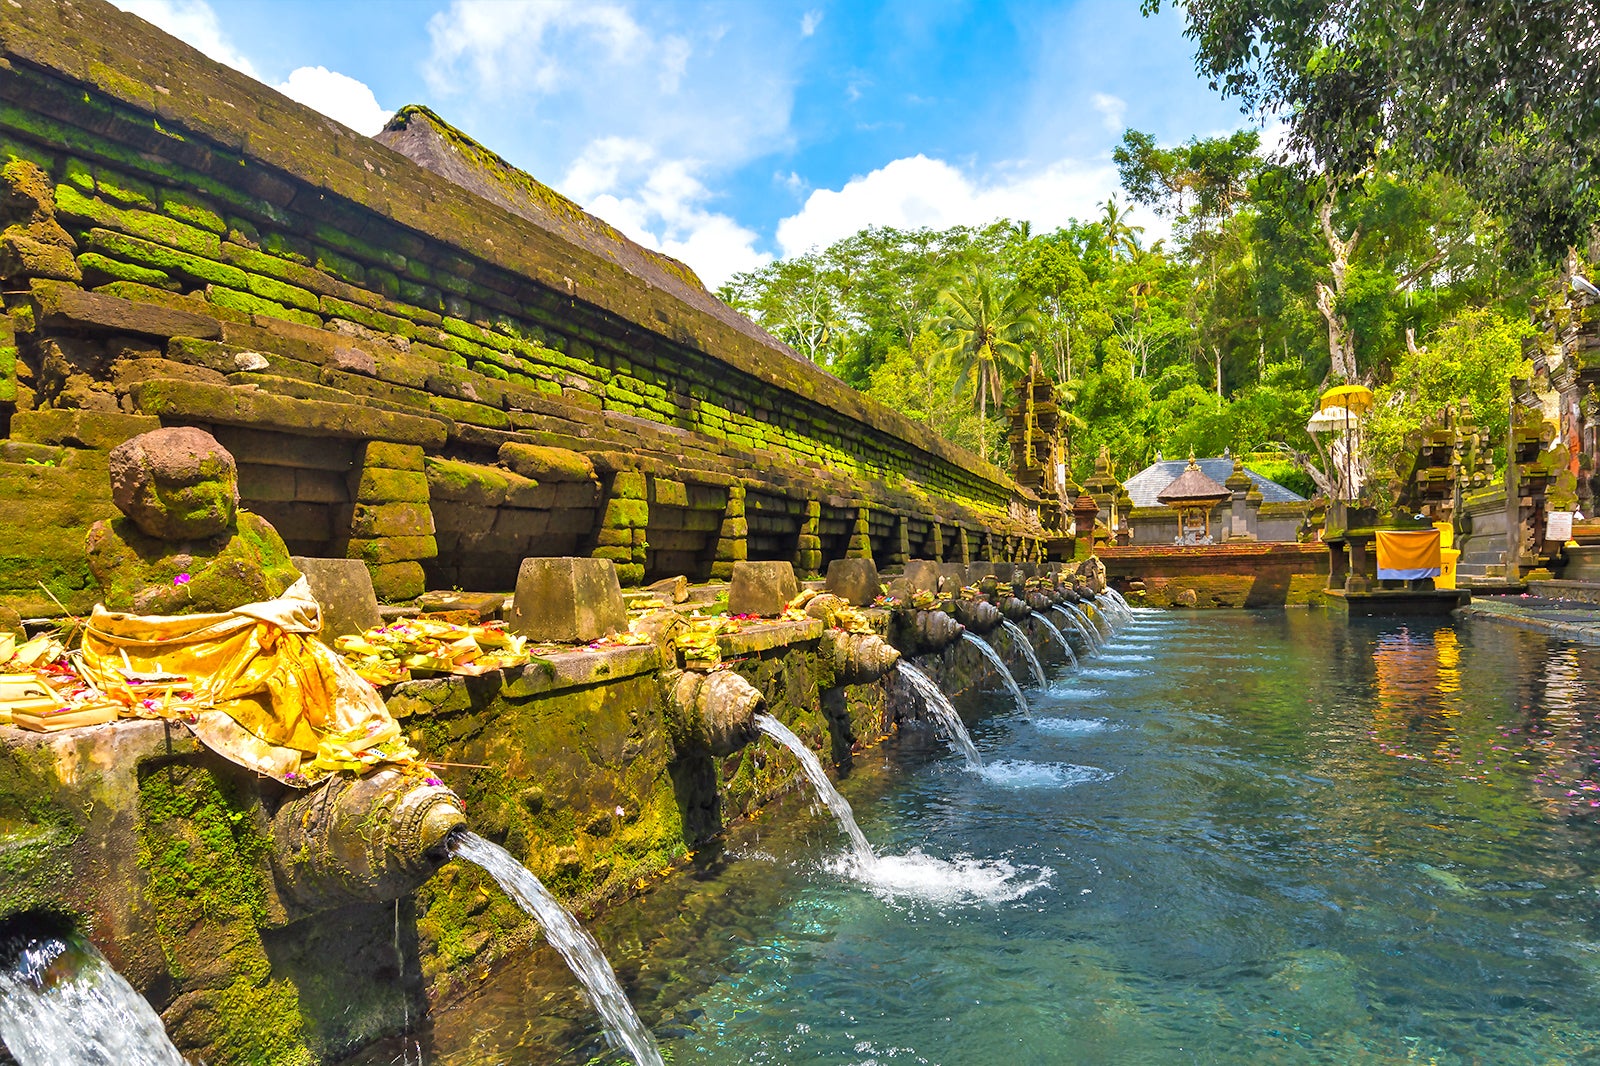 7 Outstanding Sites You Should Try To Visit Around Ubud